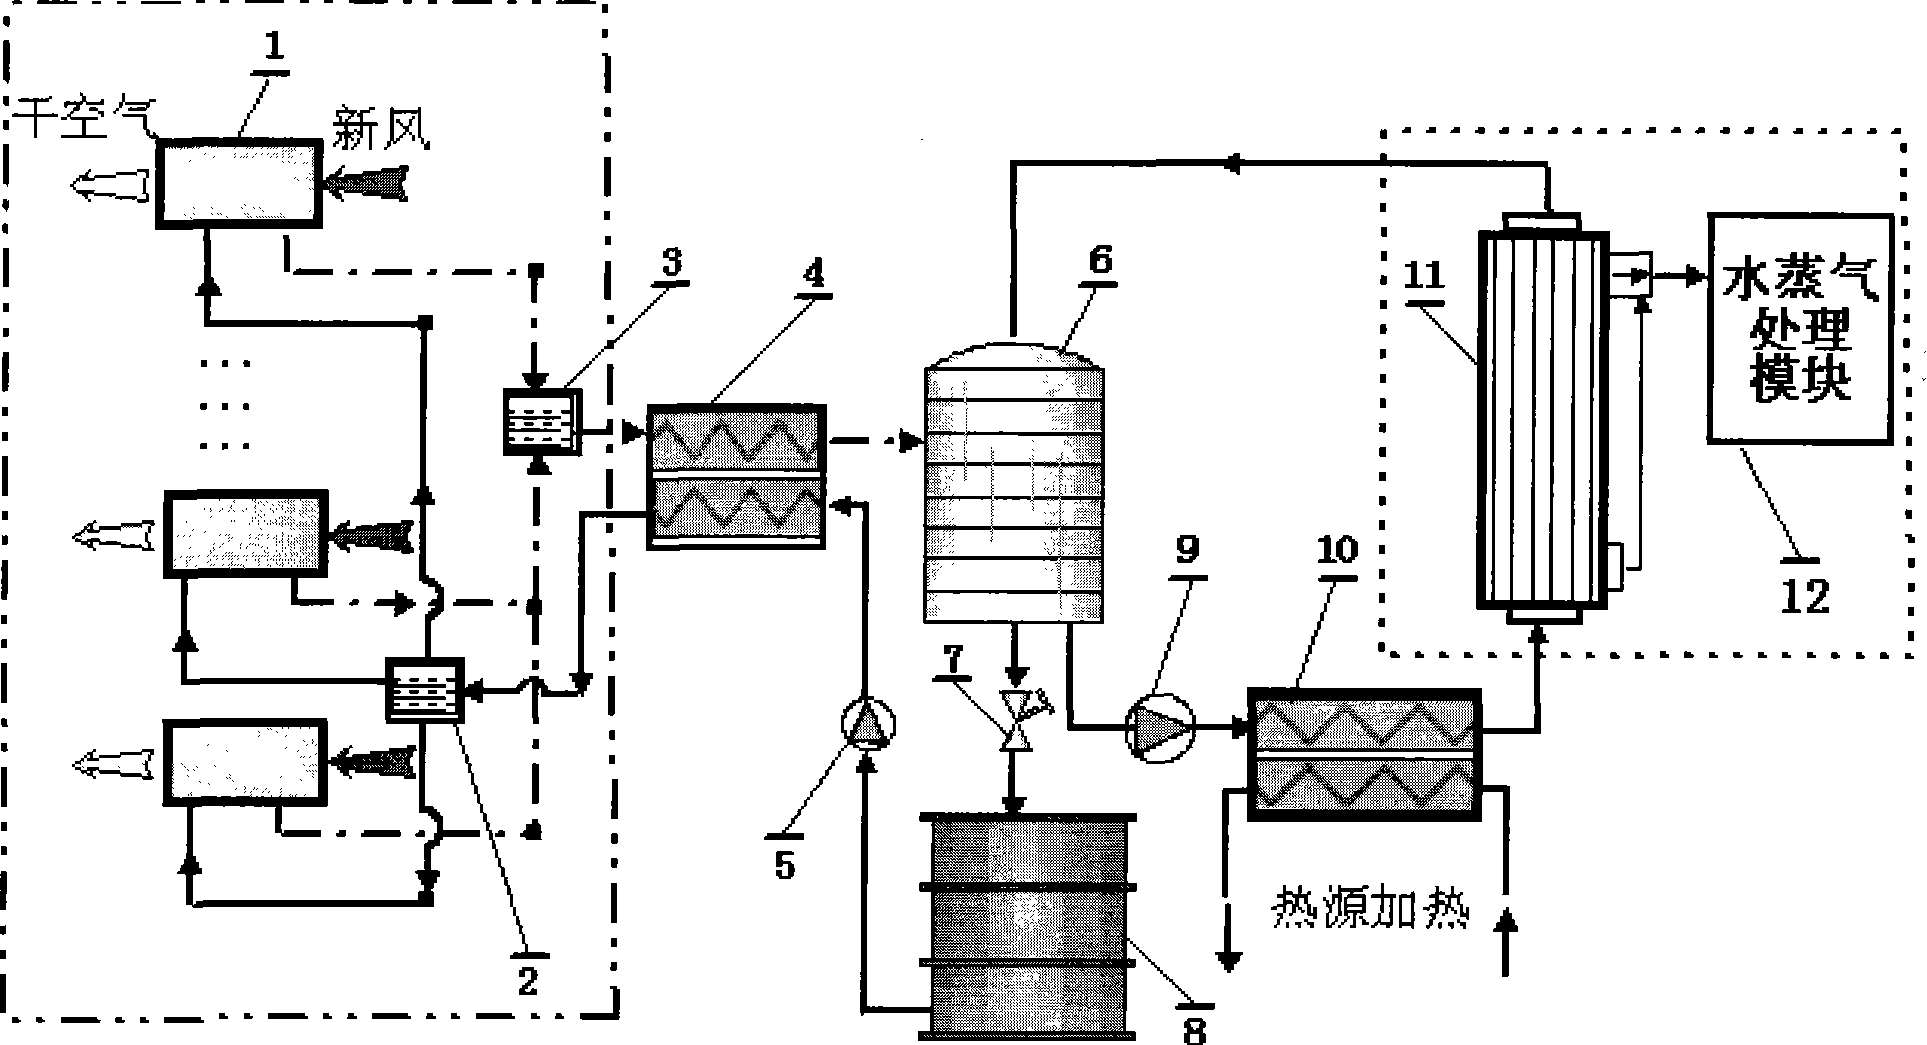 Solution regenerative device of solution dehumidifying air-conditioning system